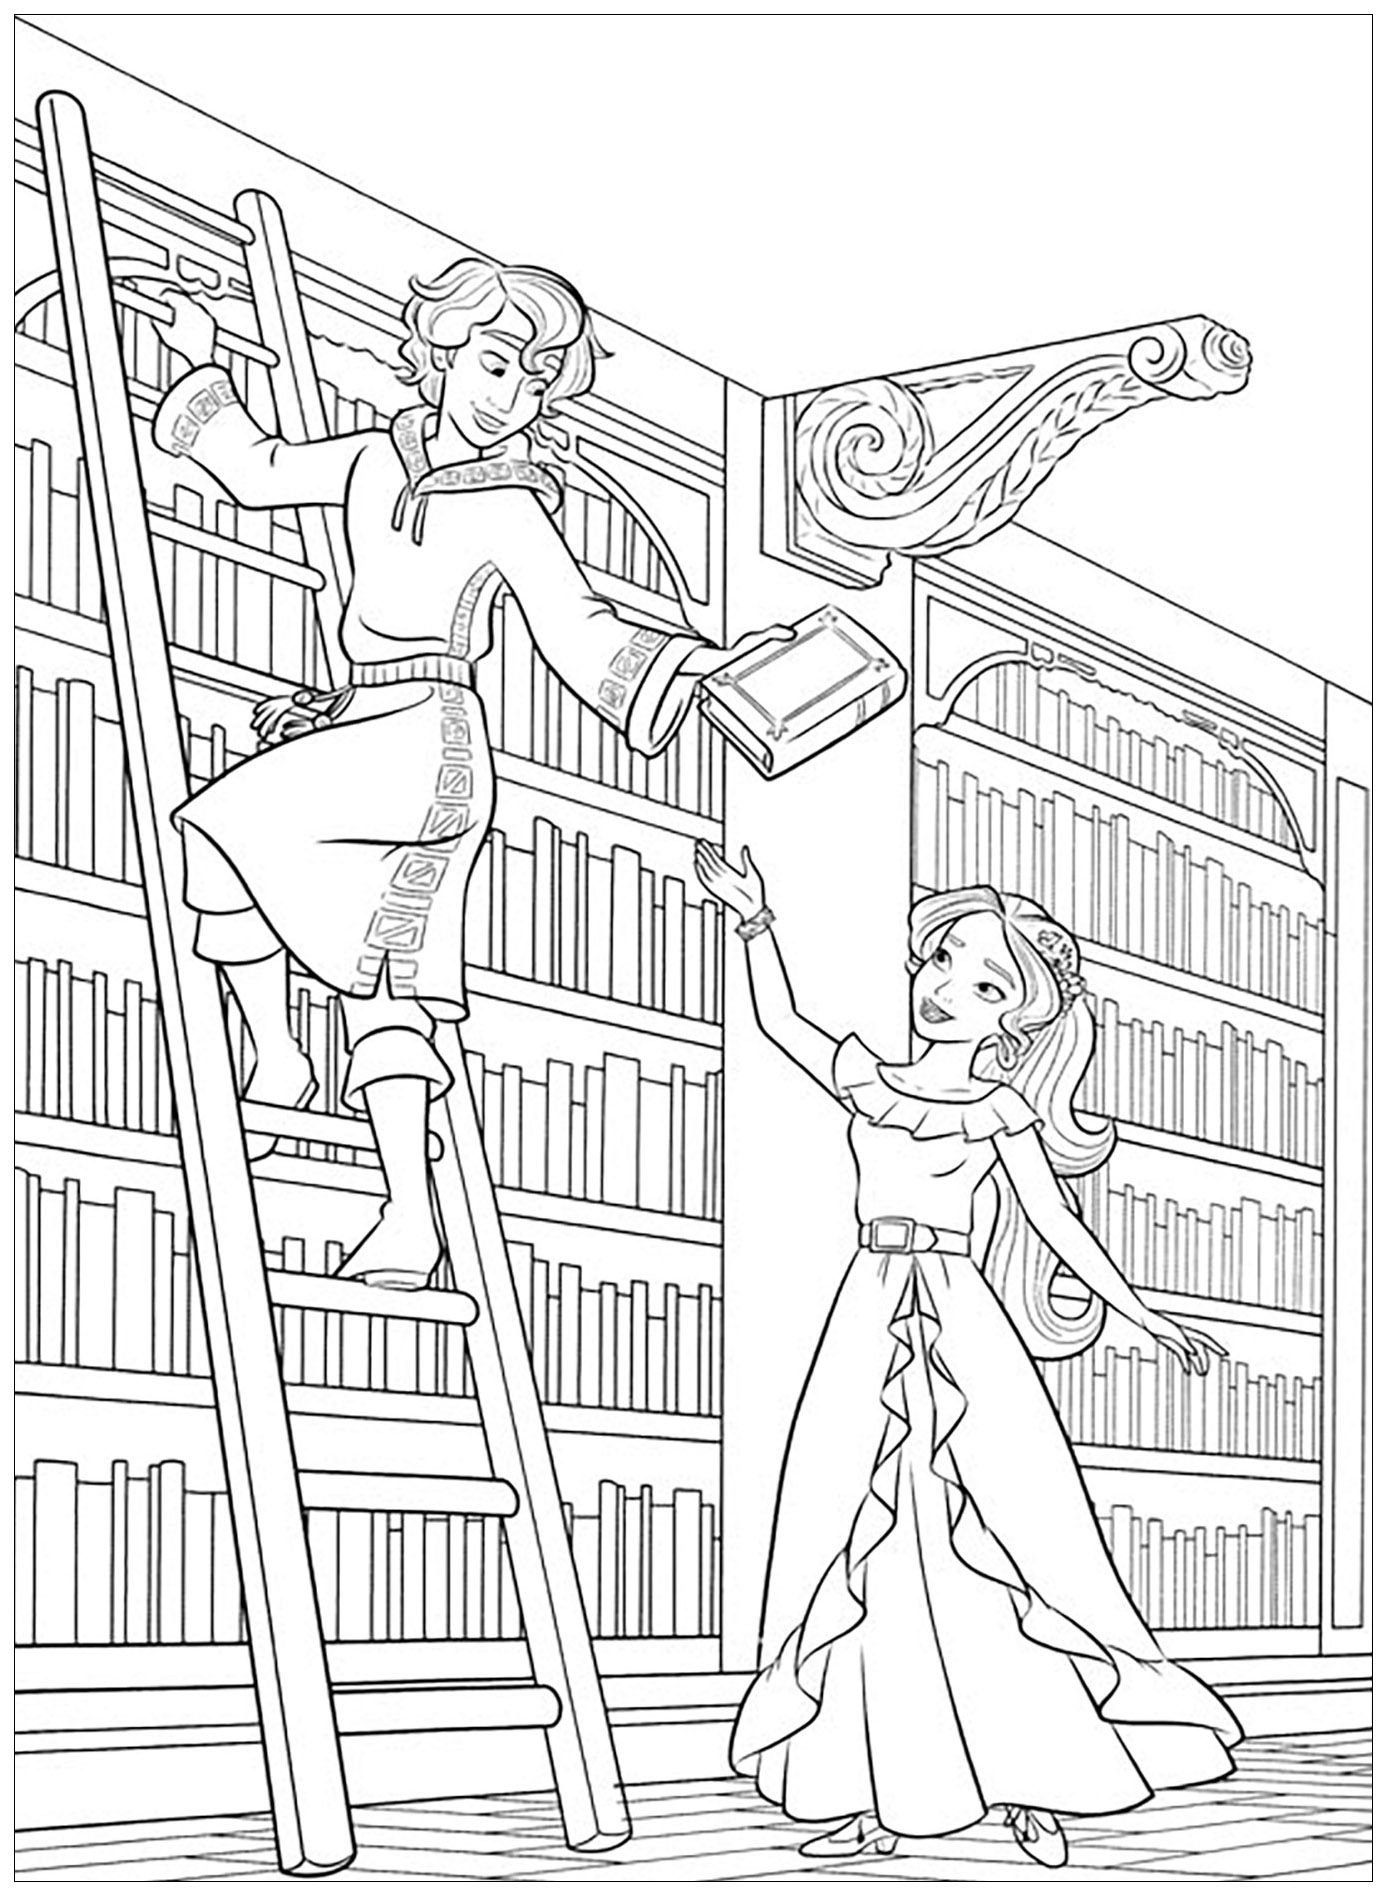 Get your pencils and markers ready to color this Elena Avalor coloring page